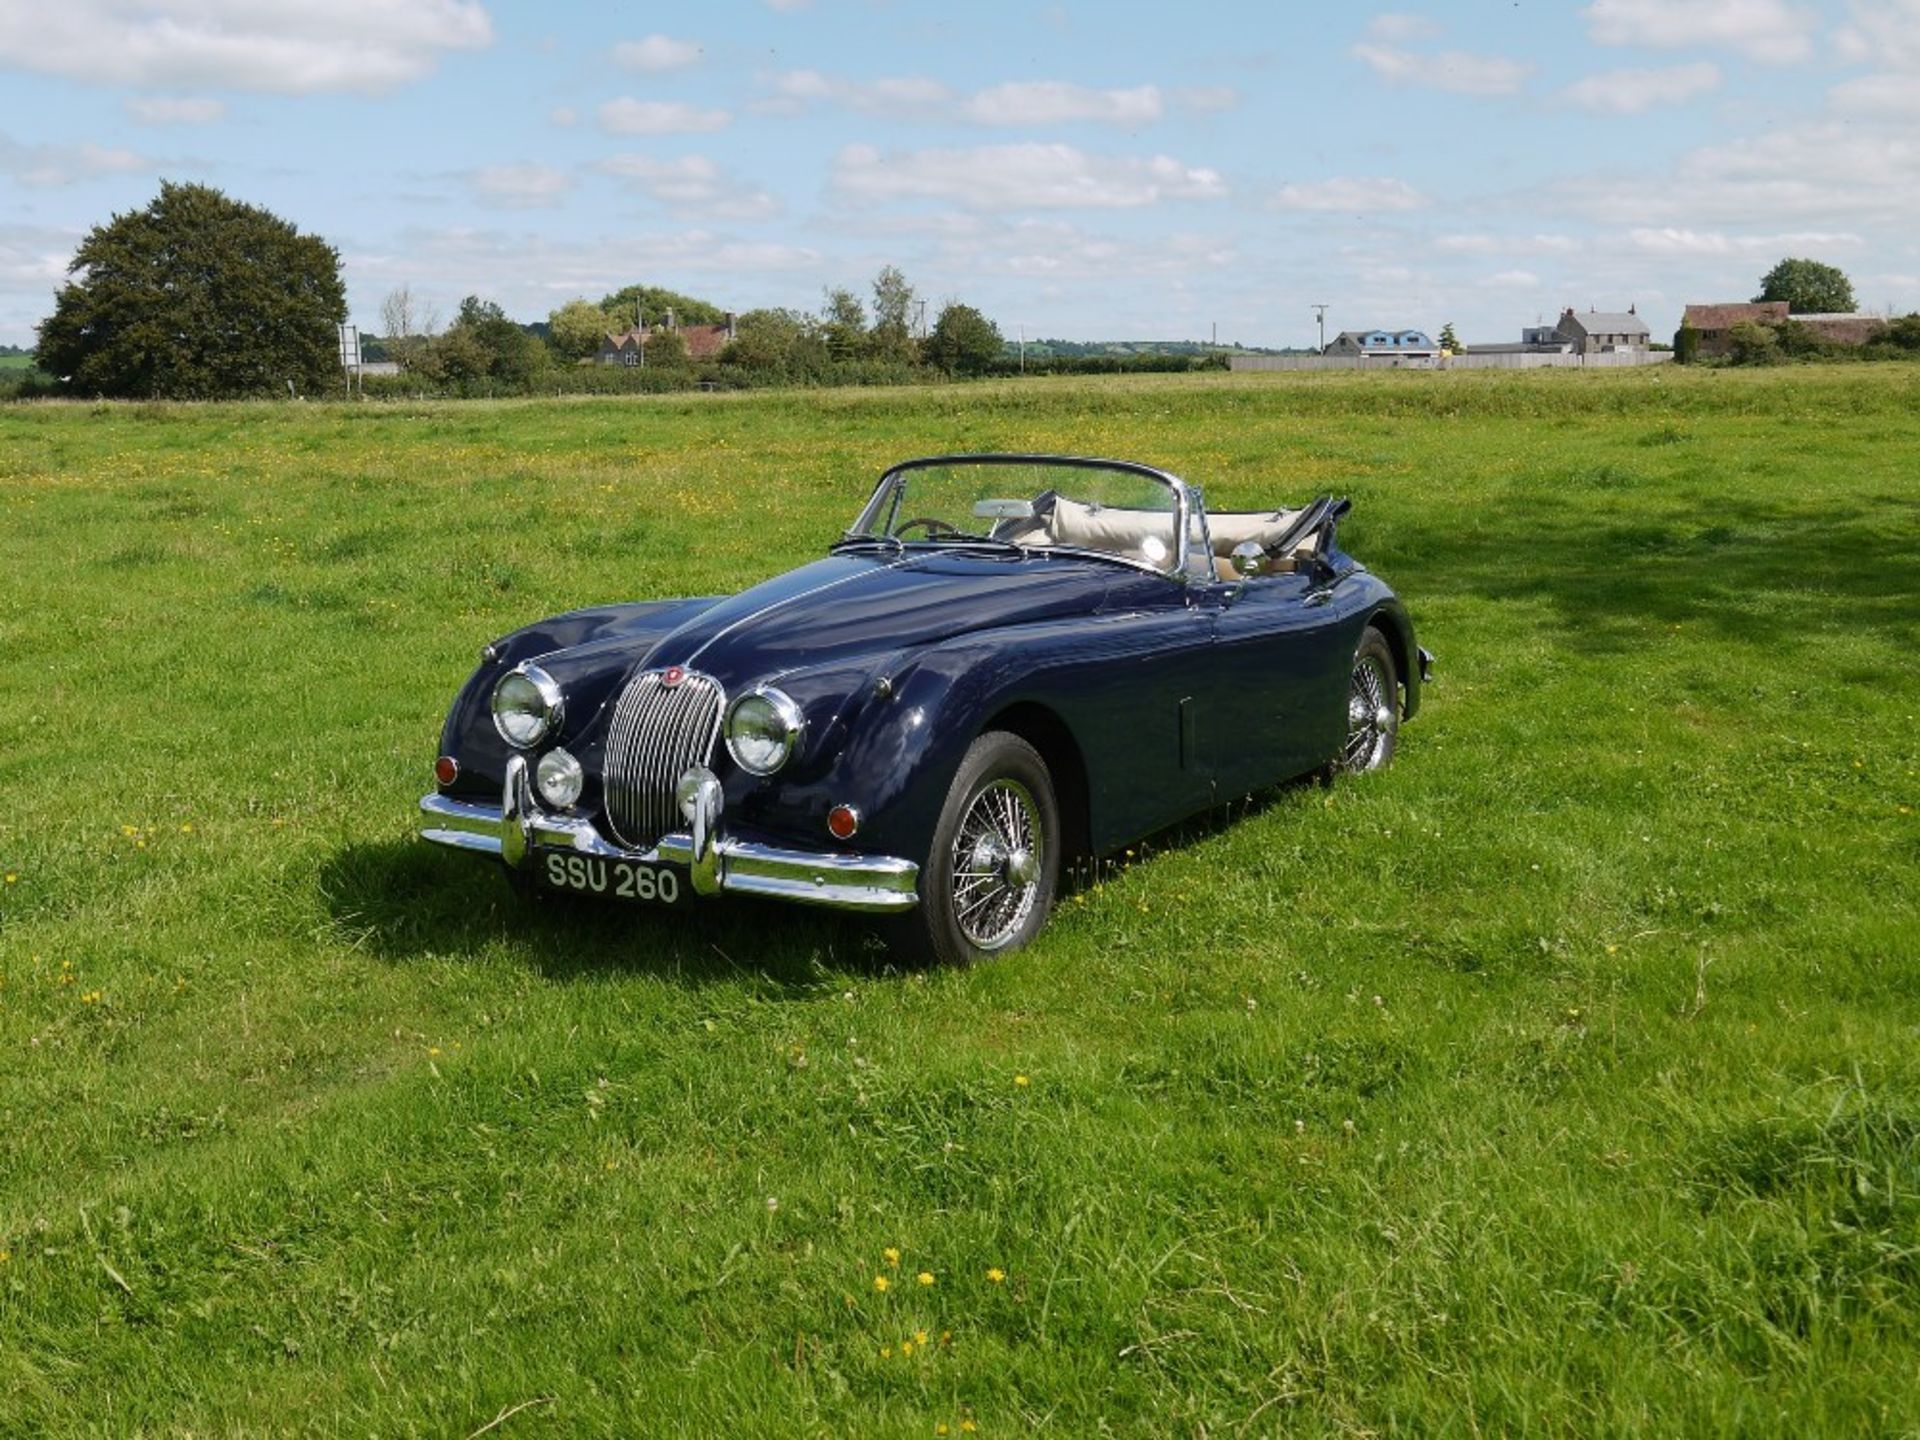 1958 JAGUAR XK150 DROPHEAD COUPE Registration Number: SSU 260 Chassis Number: S837226 Recorded - Image 3 of 26